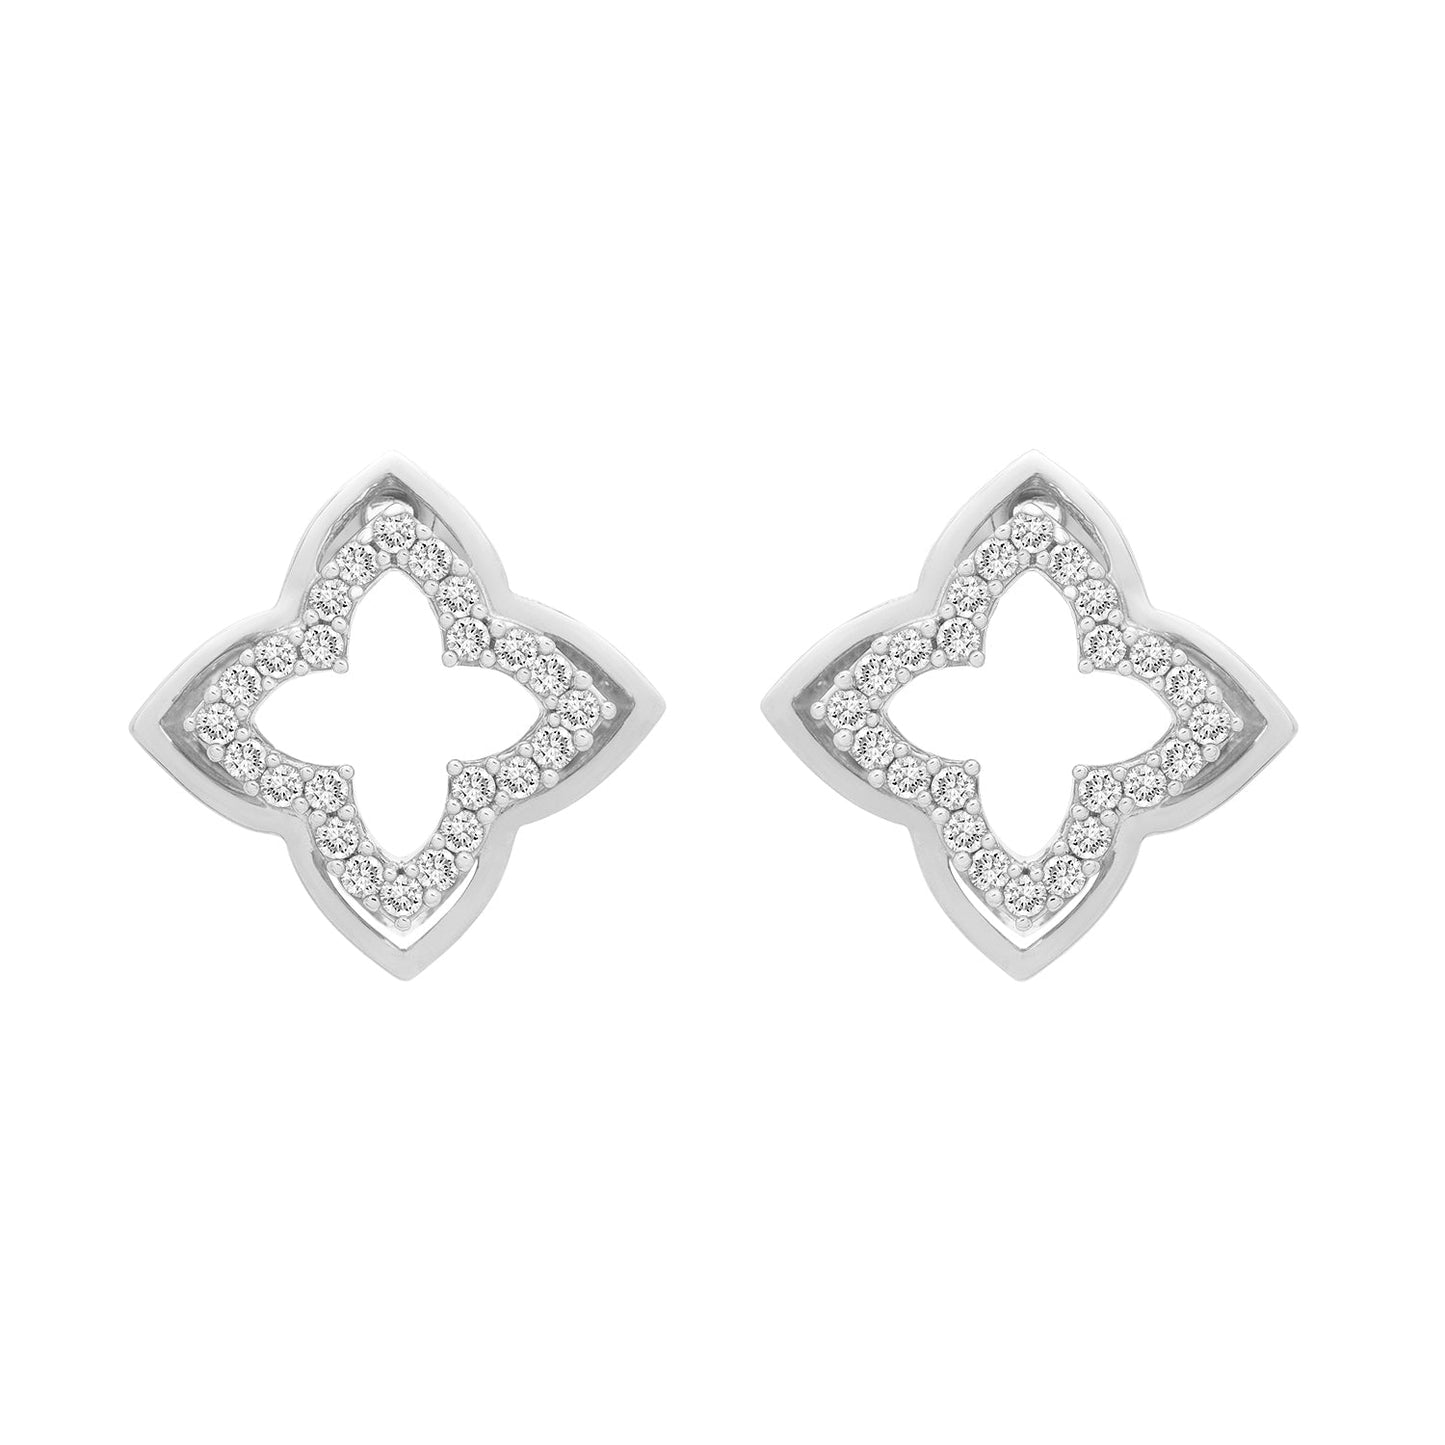 Eti Open Clover Stud Earrings in Silver With front View